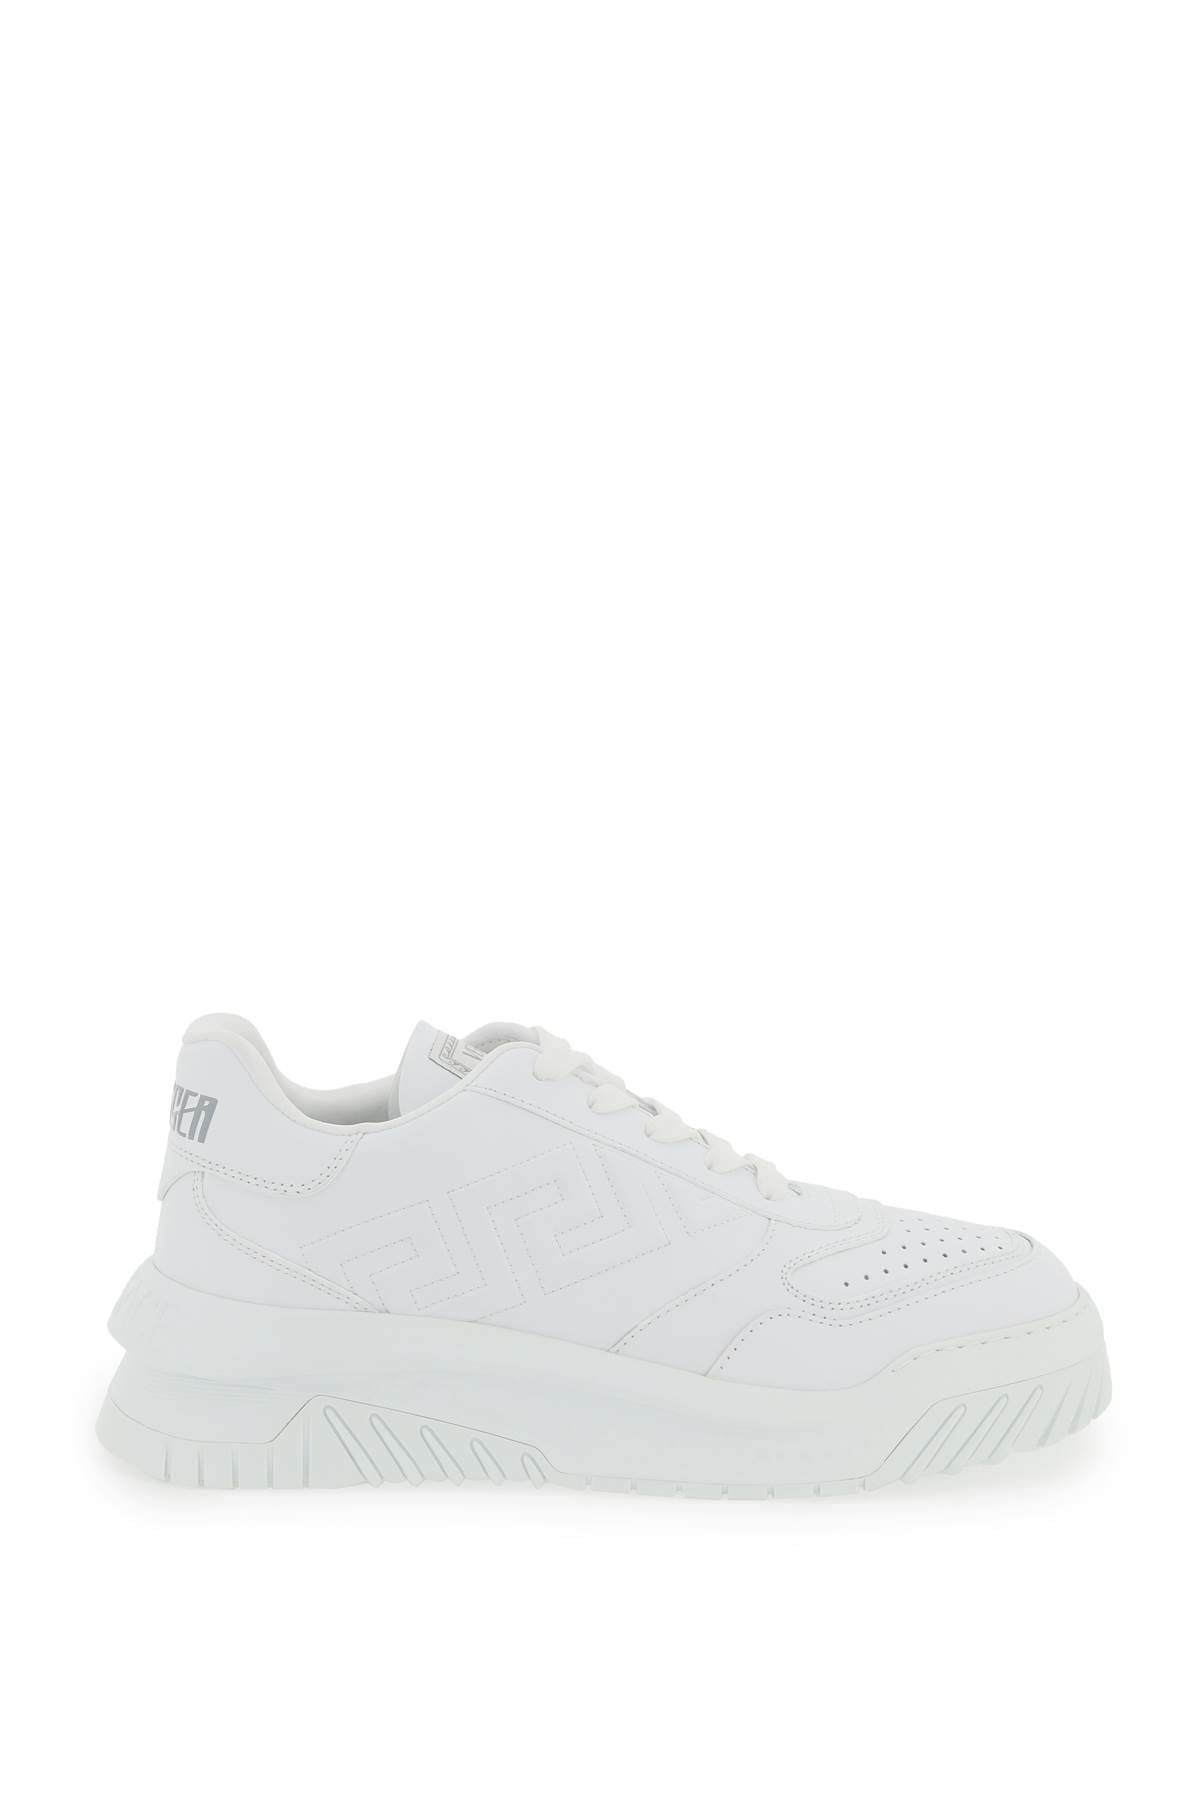 Versace odissea sneakers 1008124 1A05873 OPTICAL WHITE